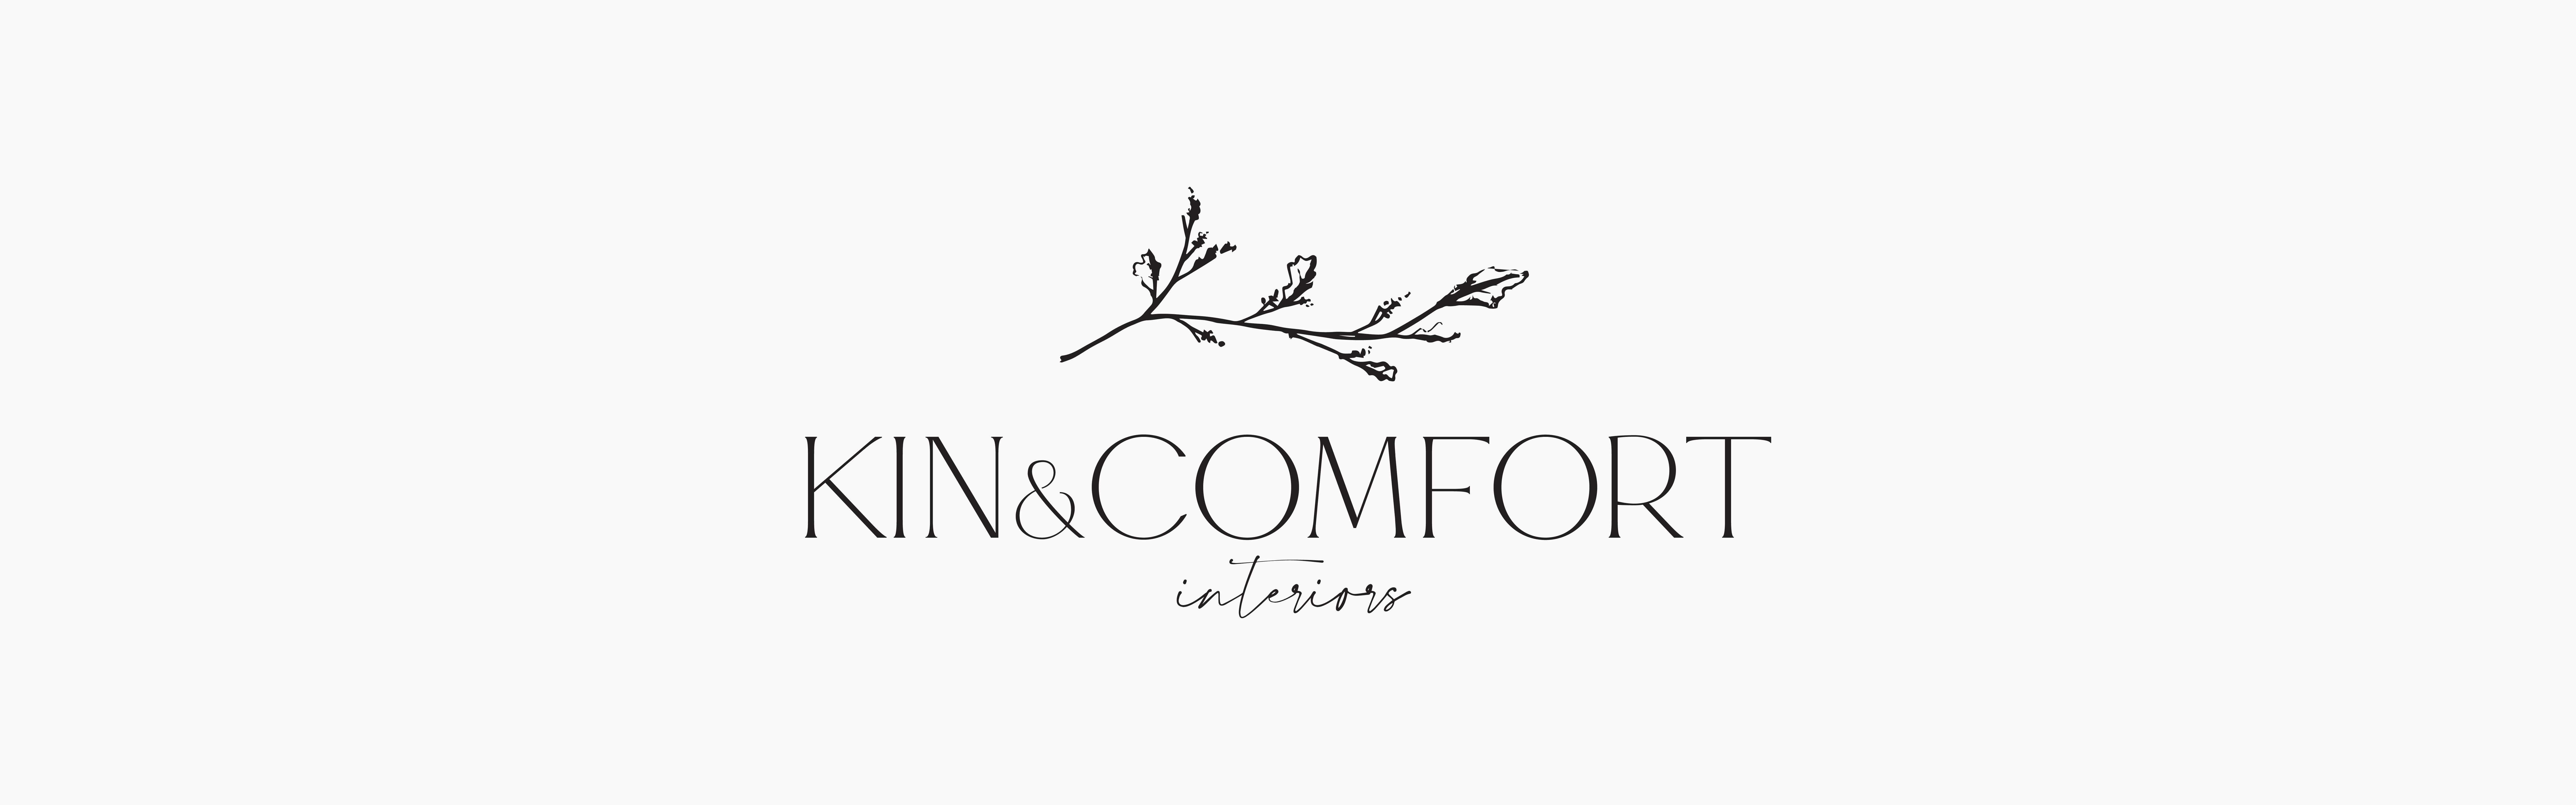 The image displays a simple, monochromatic logo for "Kin & Comfort Interiors" with a stylized branch above the ampersand symbol.